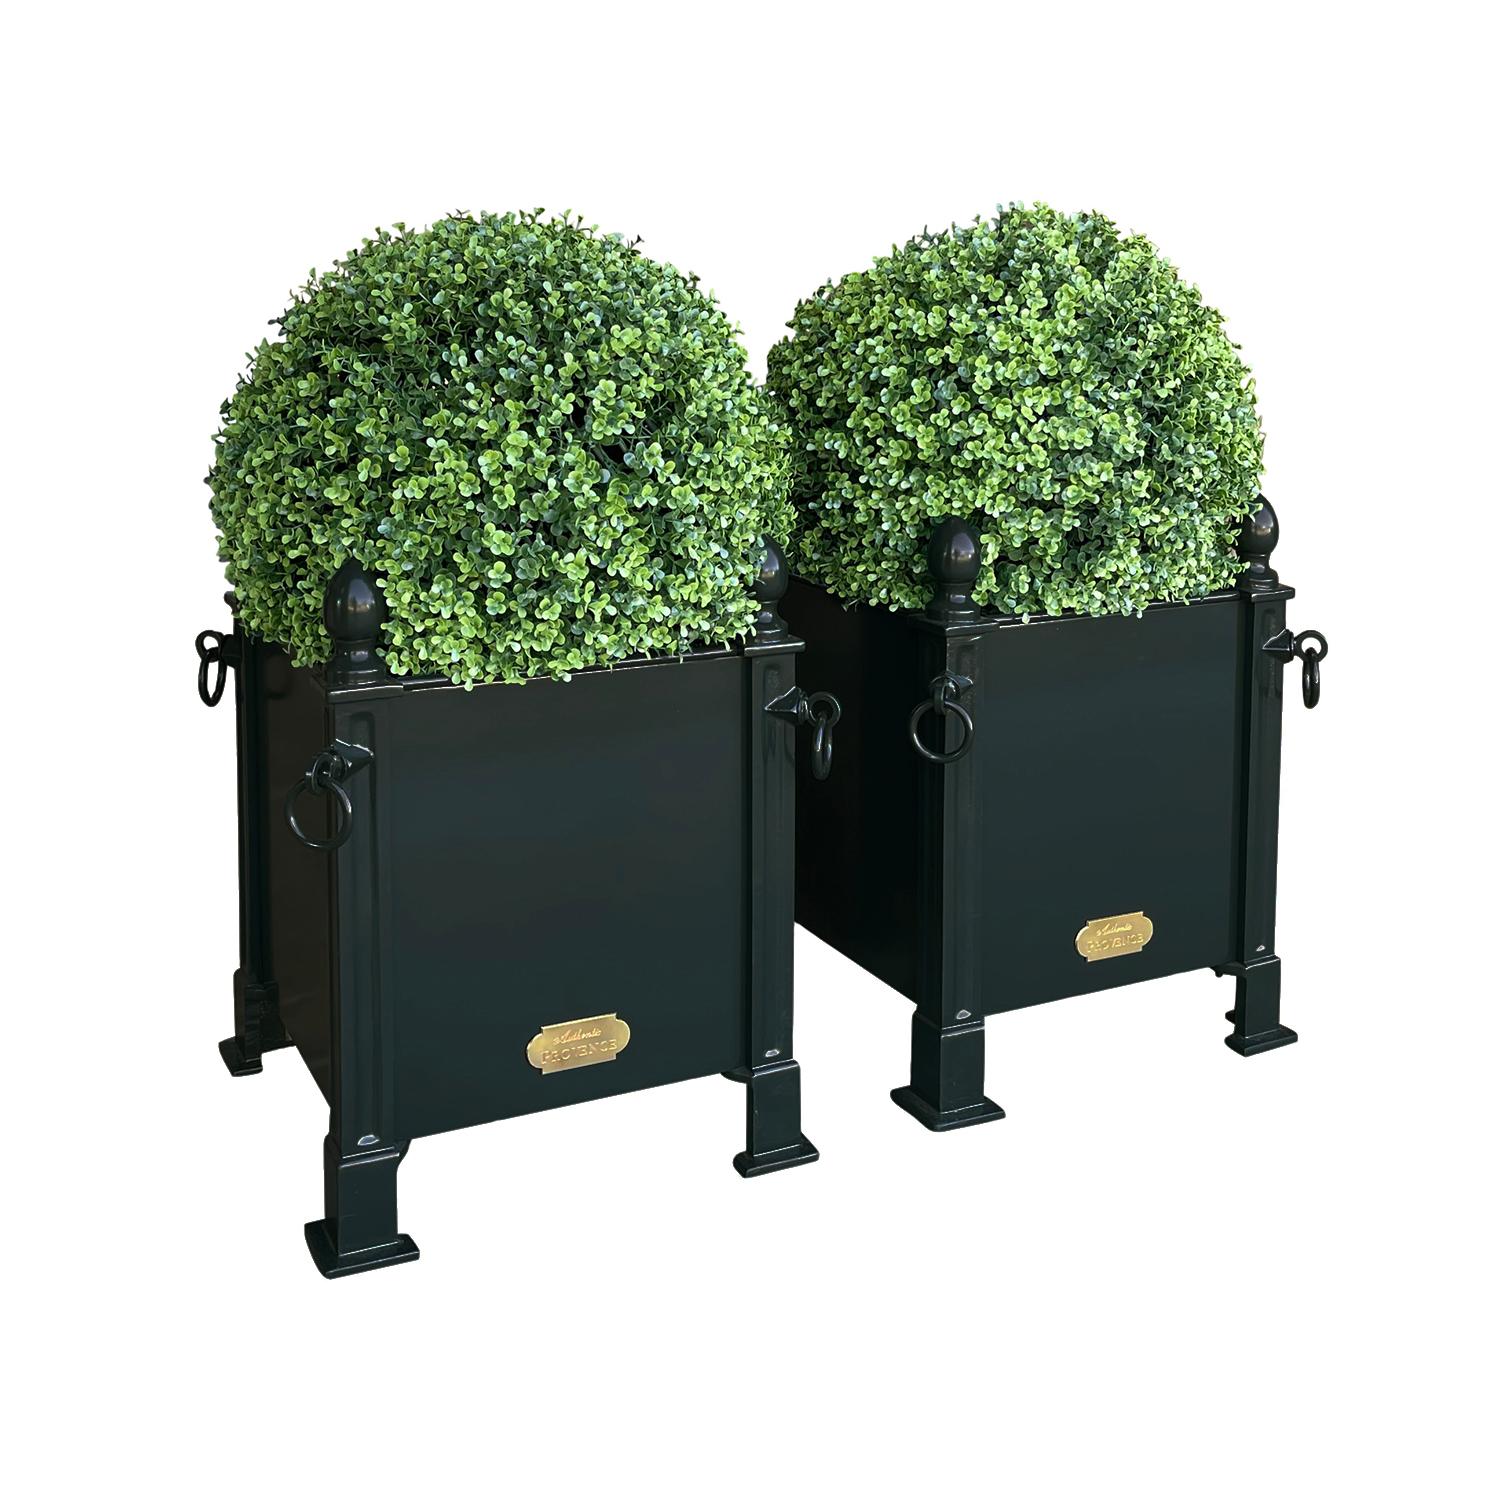 Fashionable in Paris during the 18th and 19th Centuries, this style of French planter box was often used to flank grand entrances with citrus trees or topiaries. 

Benjamin Moore Black Forest Green HC-187